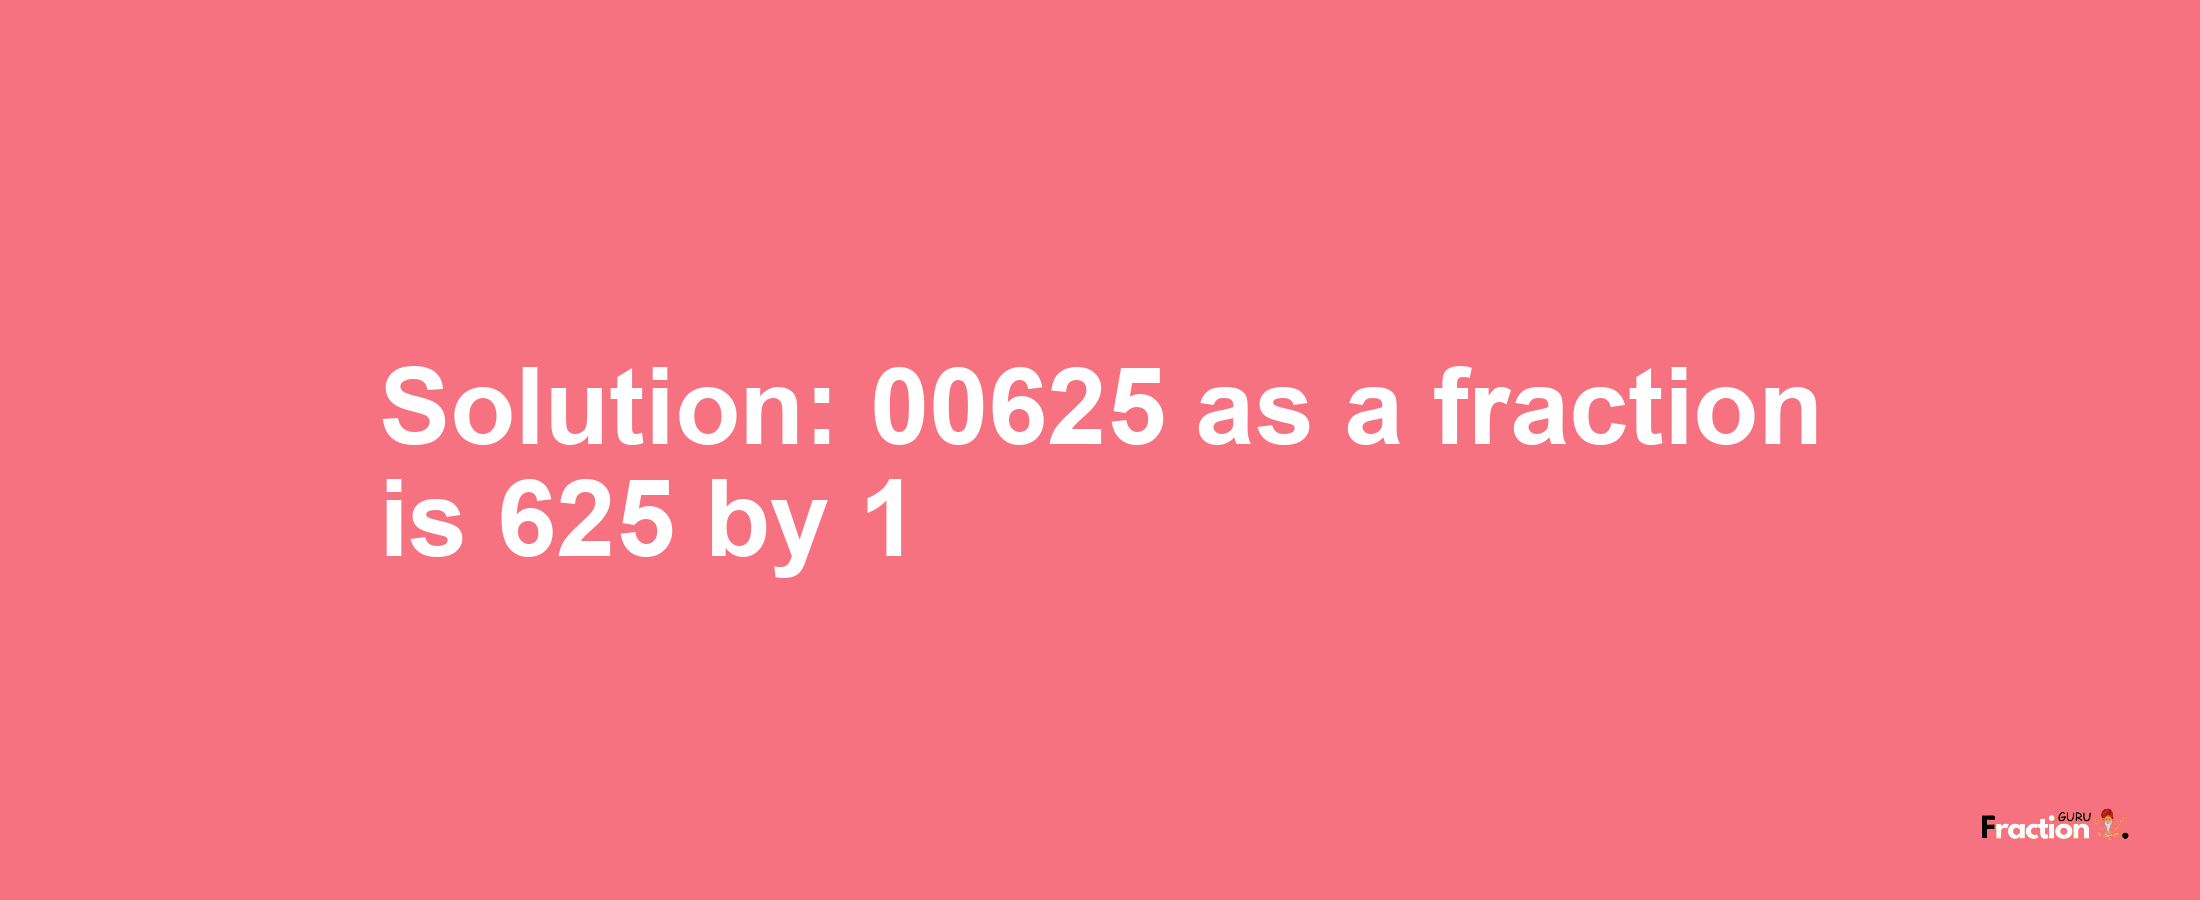 Solution:00625 as a fraction is 625/1